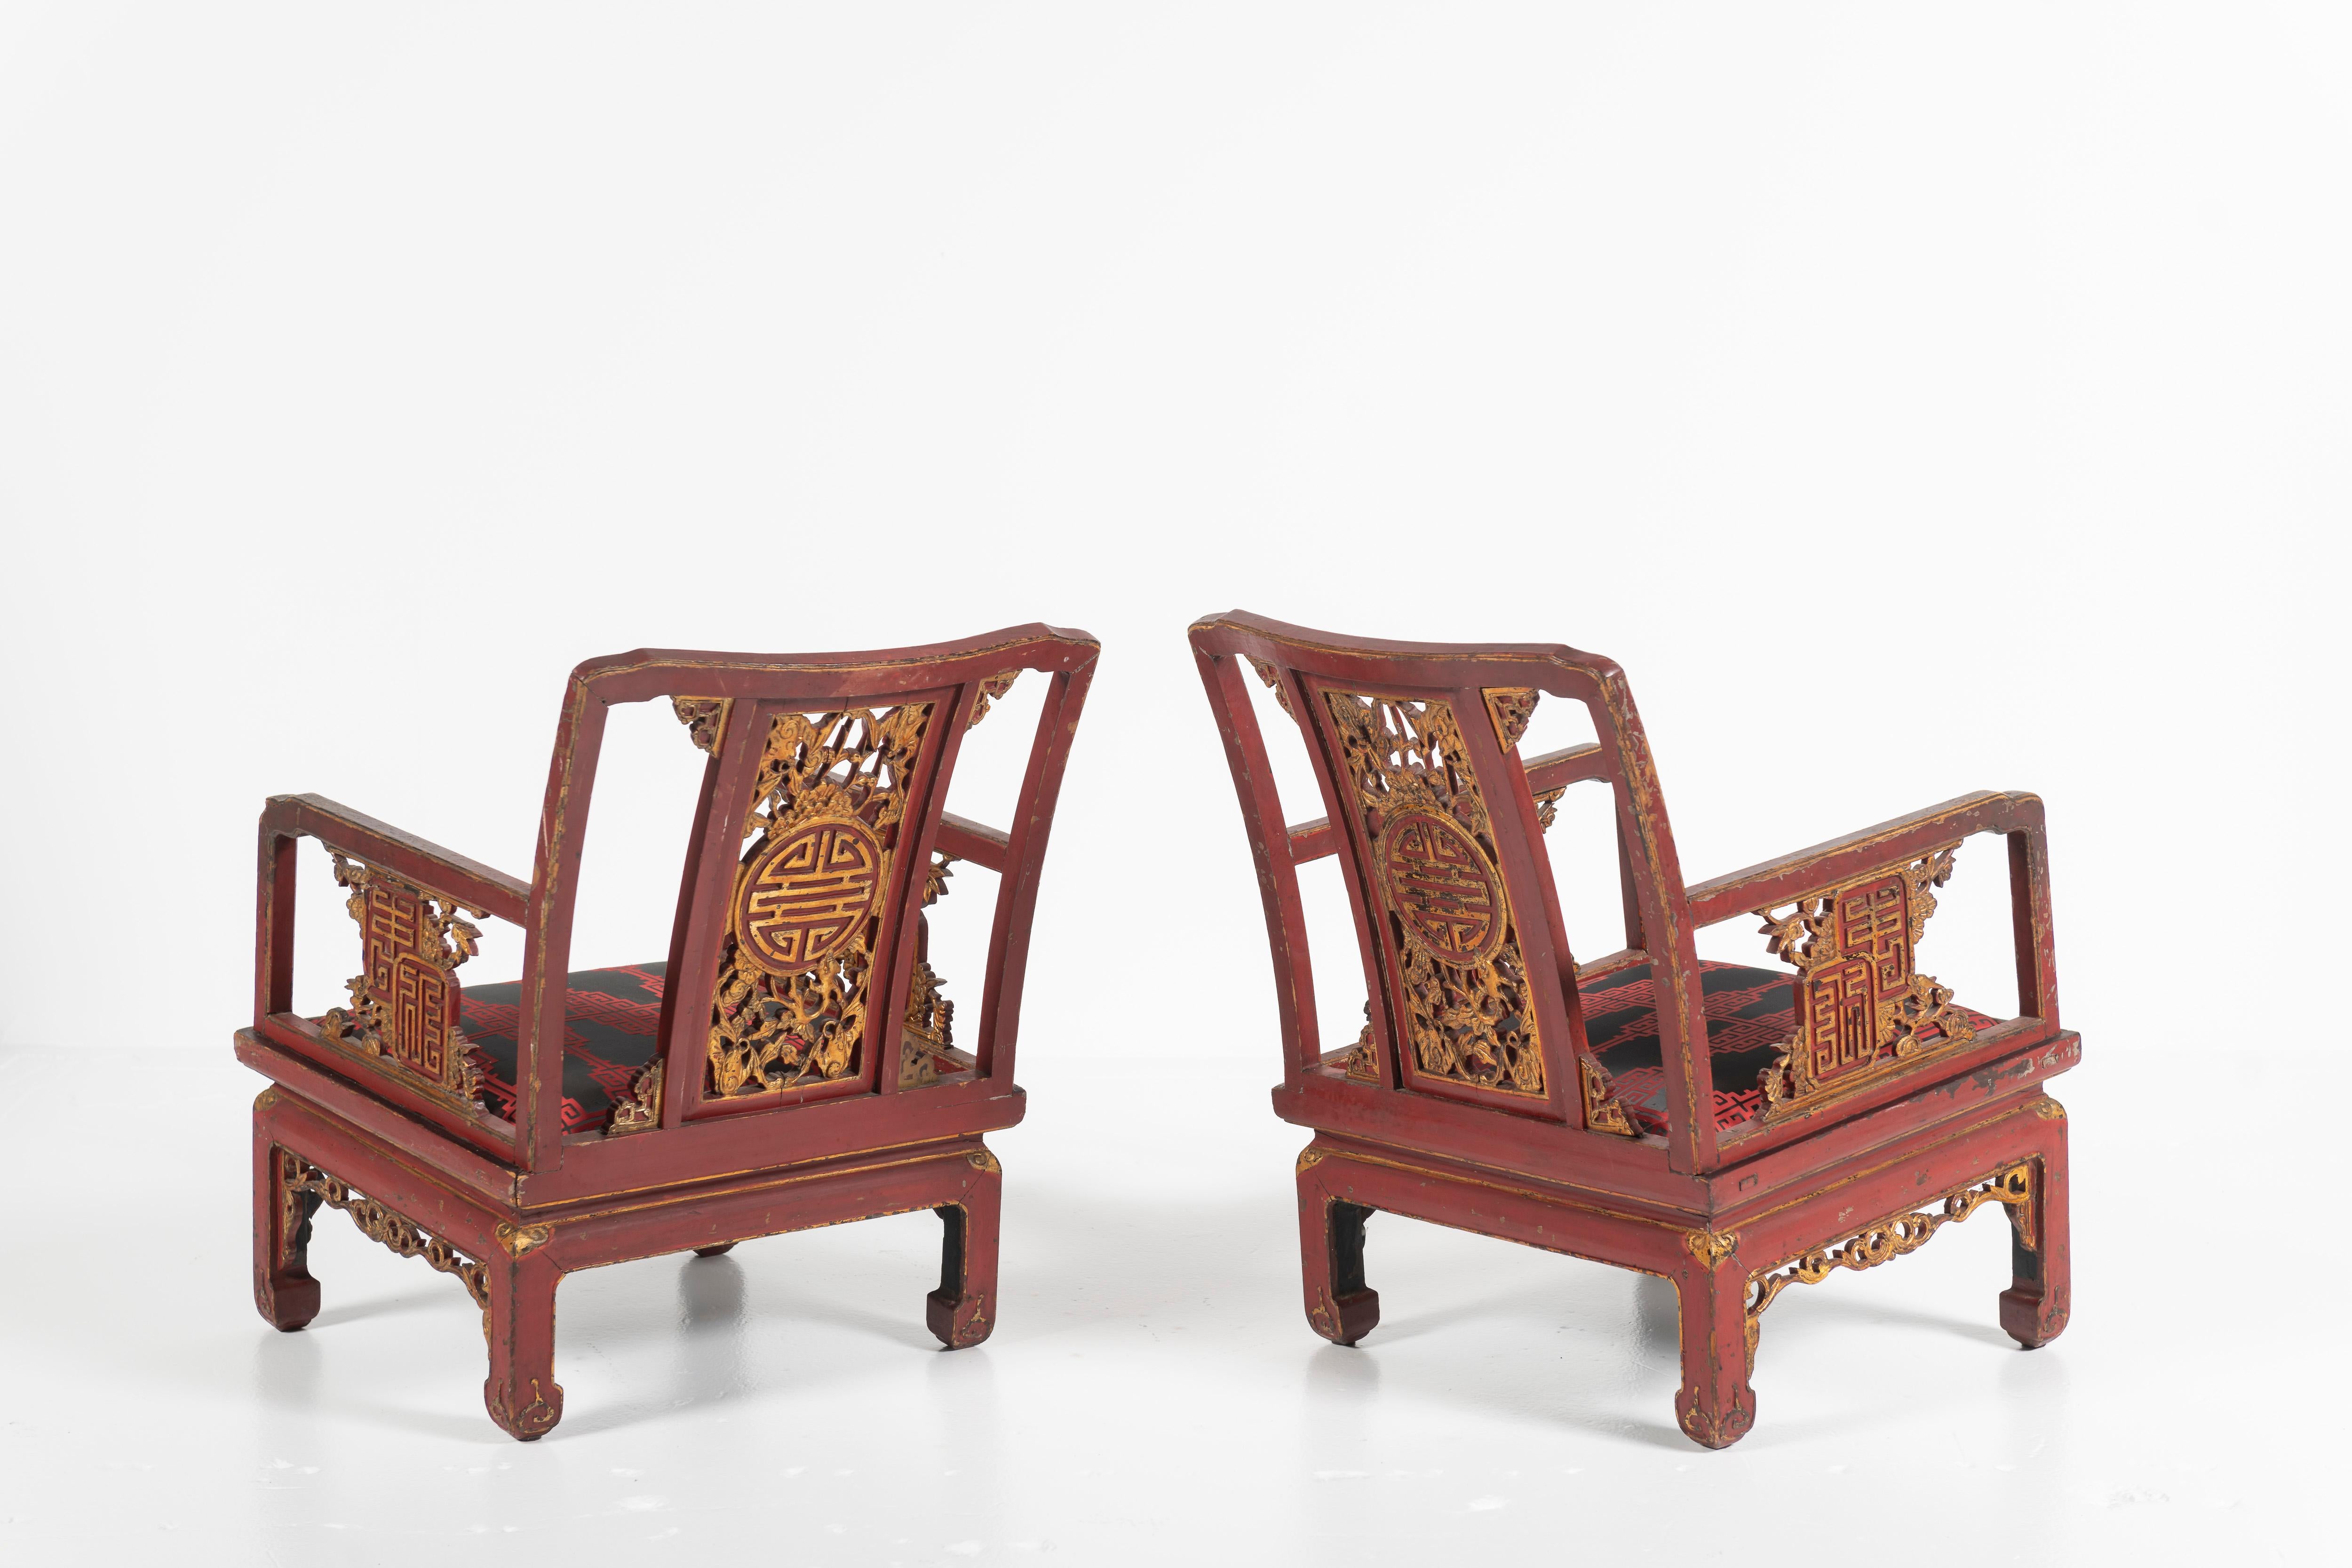 Fabric Pair of Antique French Chinoiserie Armchairs, Red and Gold Lacquer, 19th Century For Sale